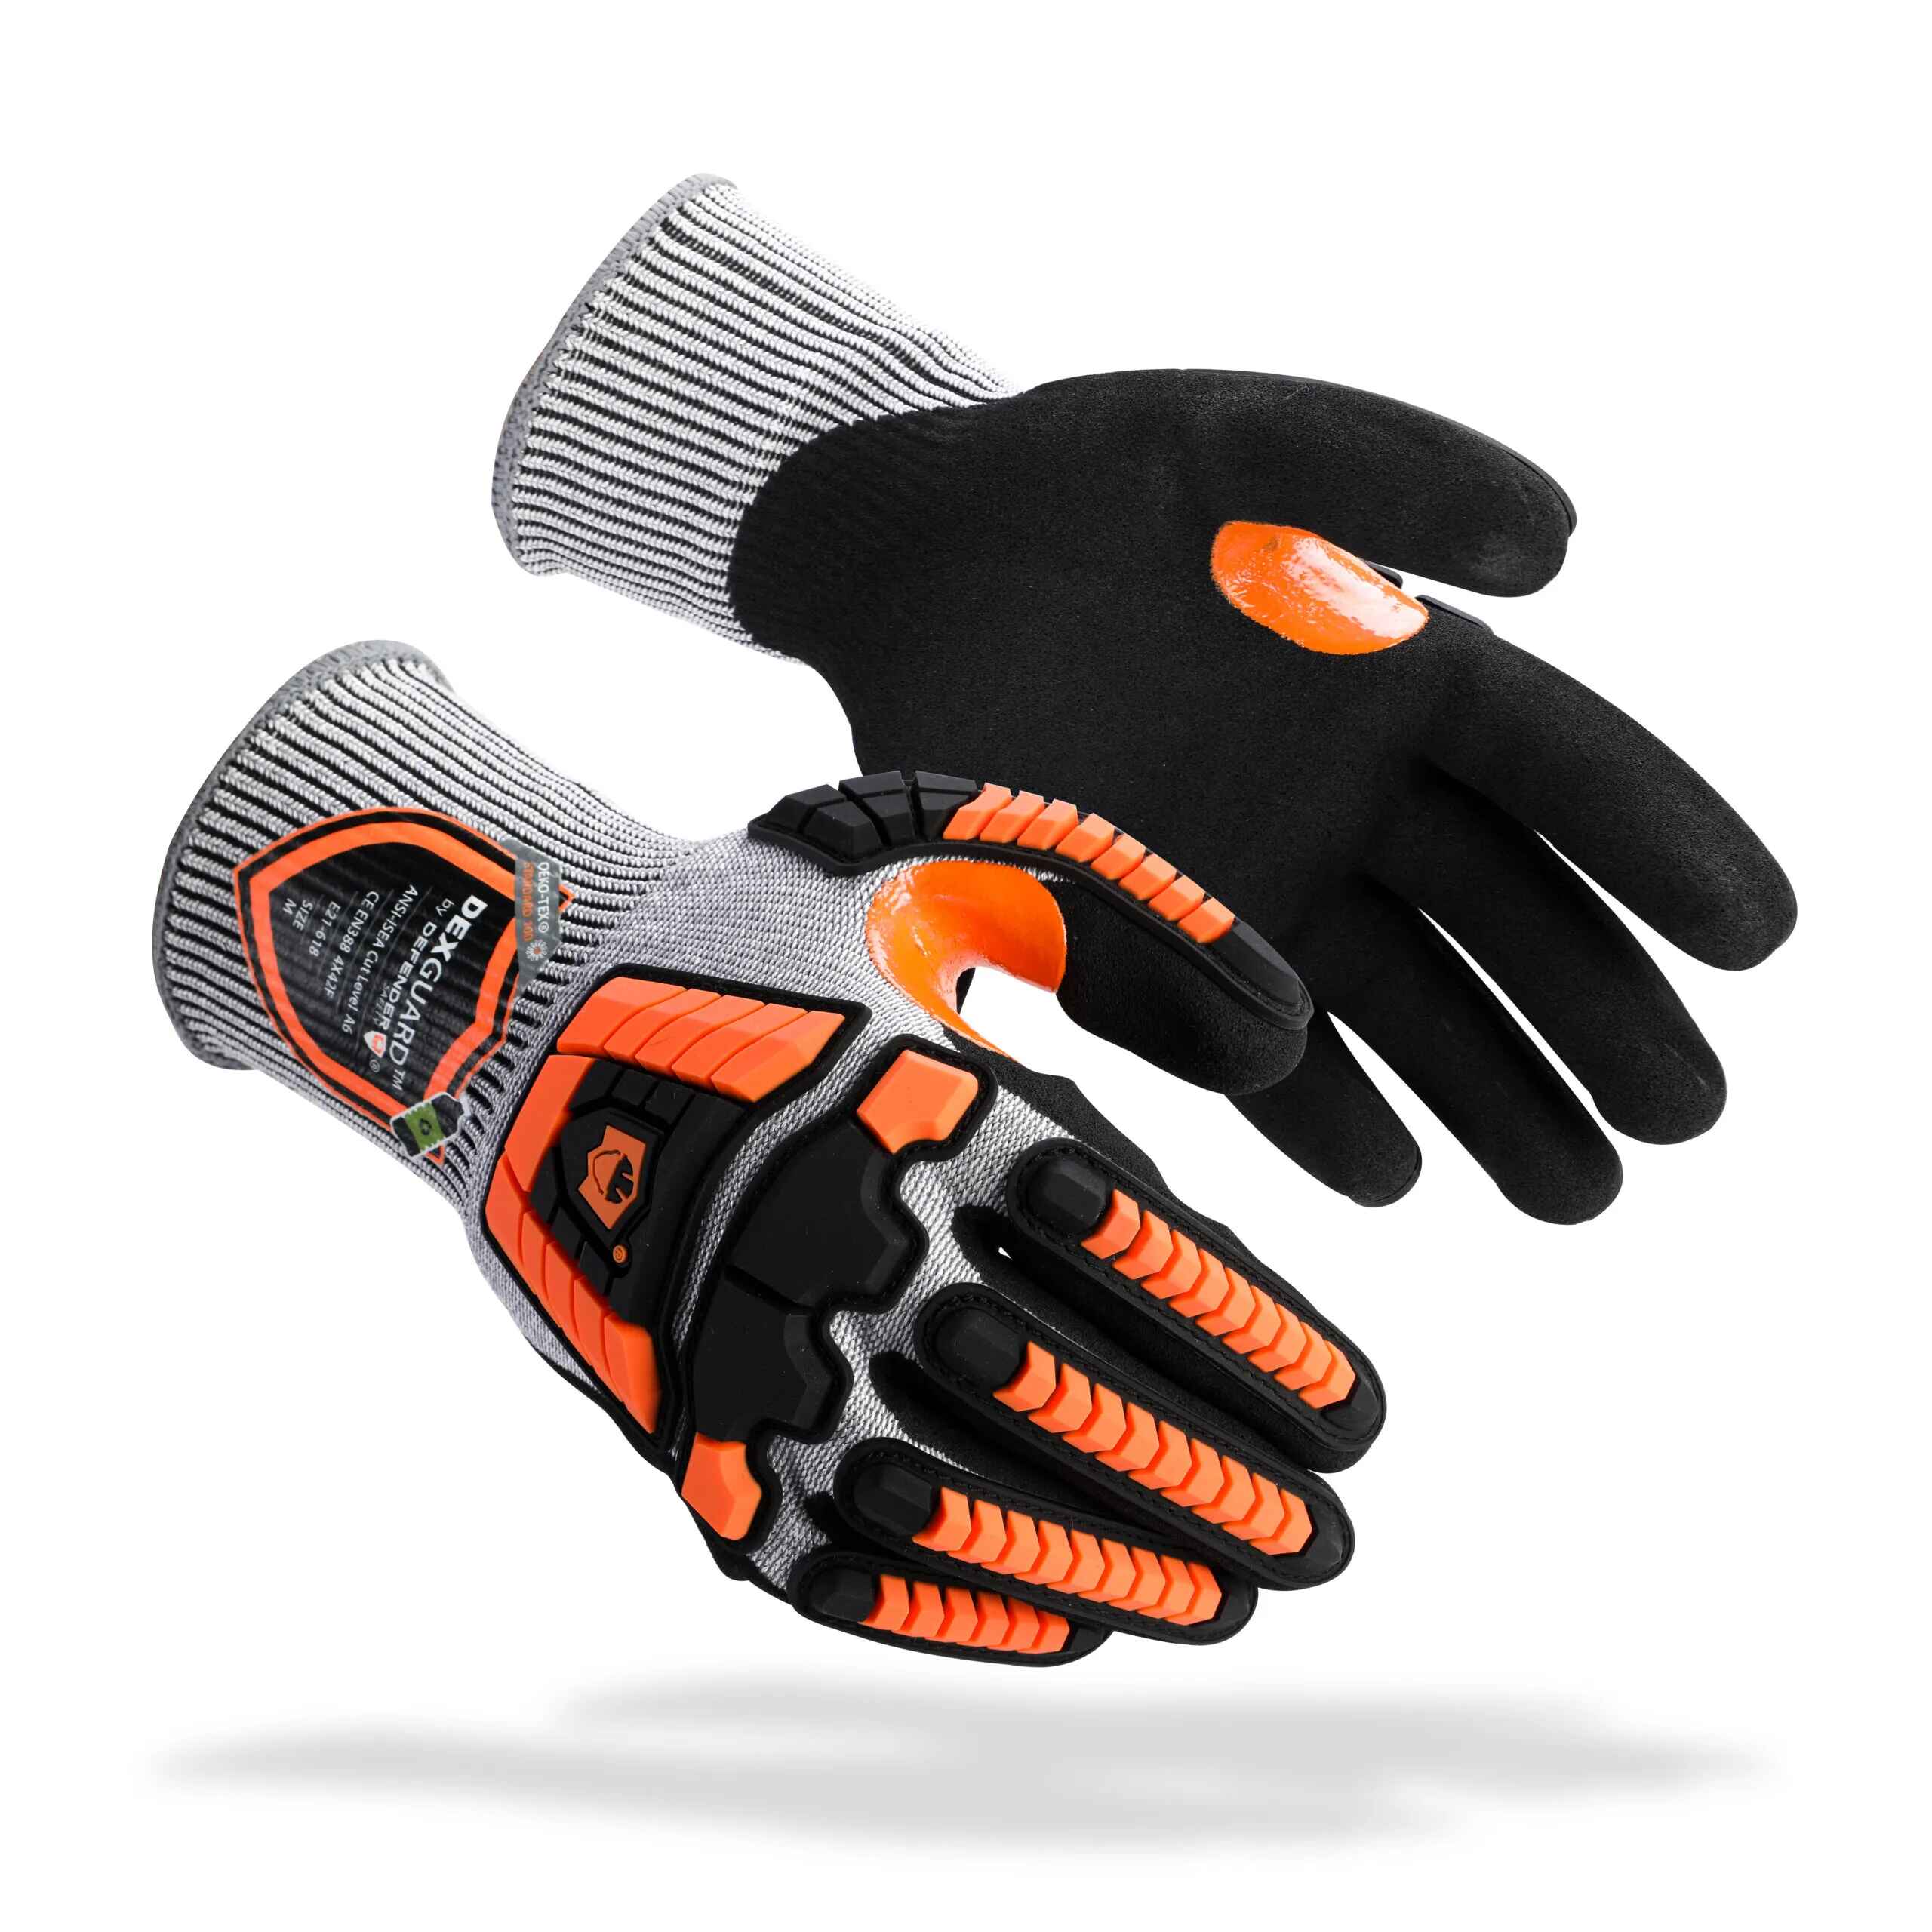 BDG BDG X-SITE MECHANIC GLOVES, RED/YLW, XS/6, MICROFIBER/SPANDEX,  ANSI/ISEA ABRASION 4/CUT A5 - Mechanics- & Riggers-Style Cut-Resistant  Gloves - ALG20110623XS